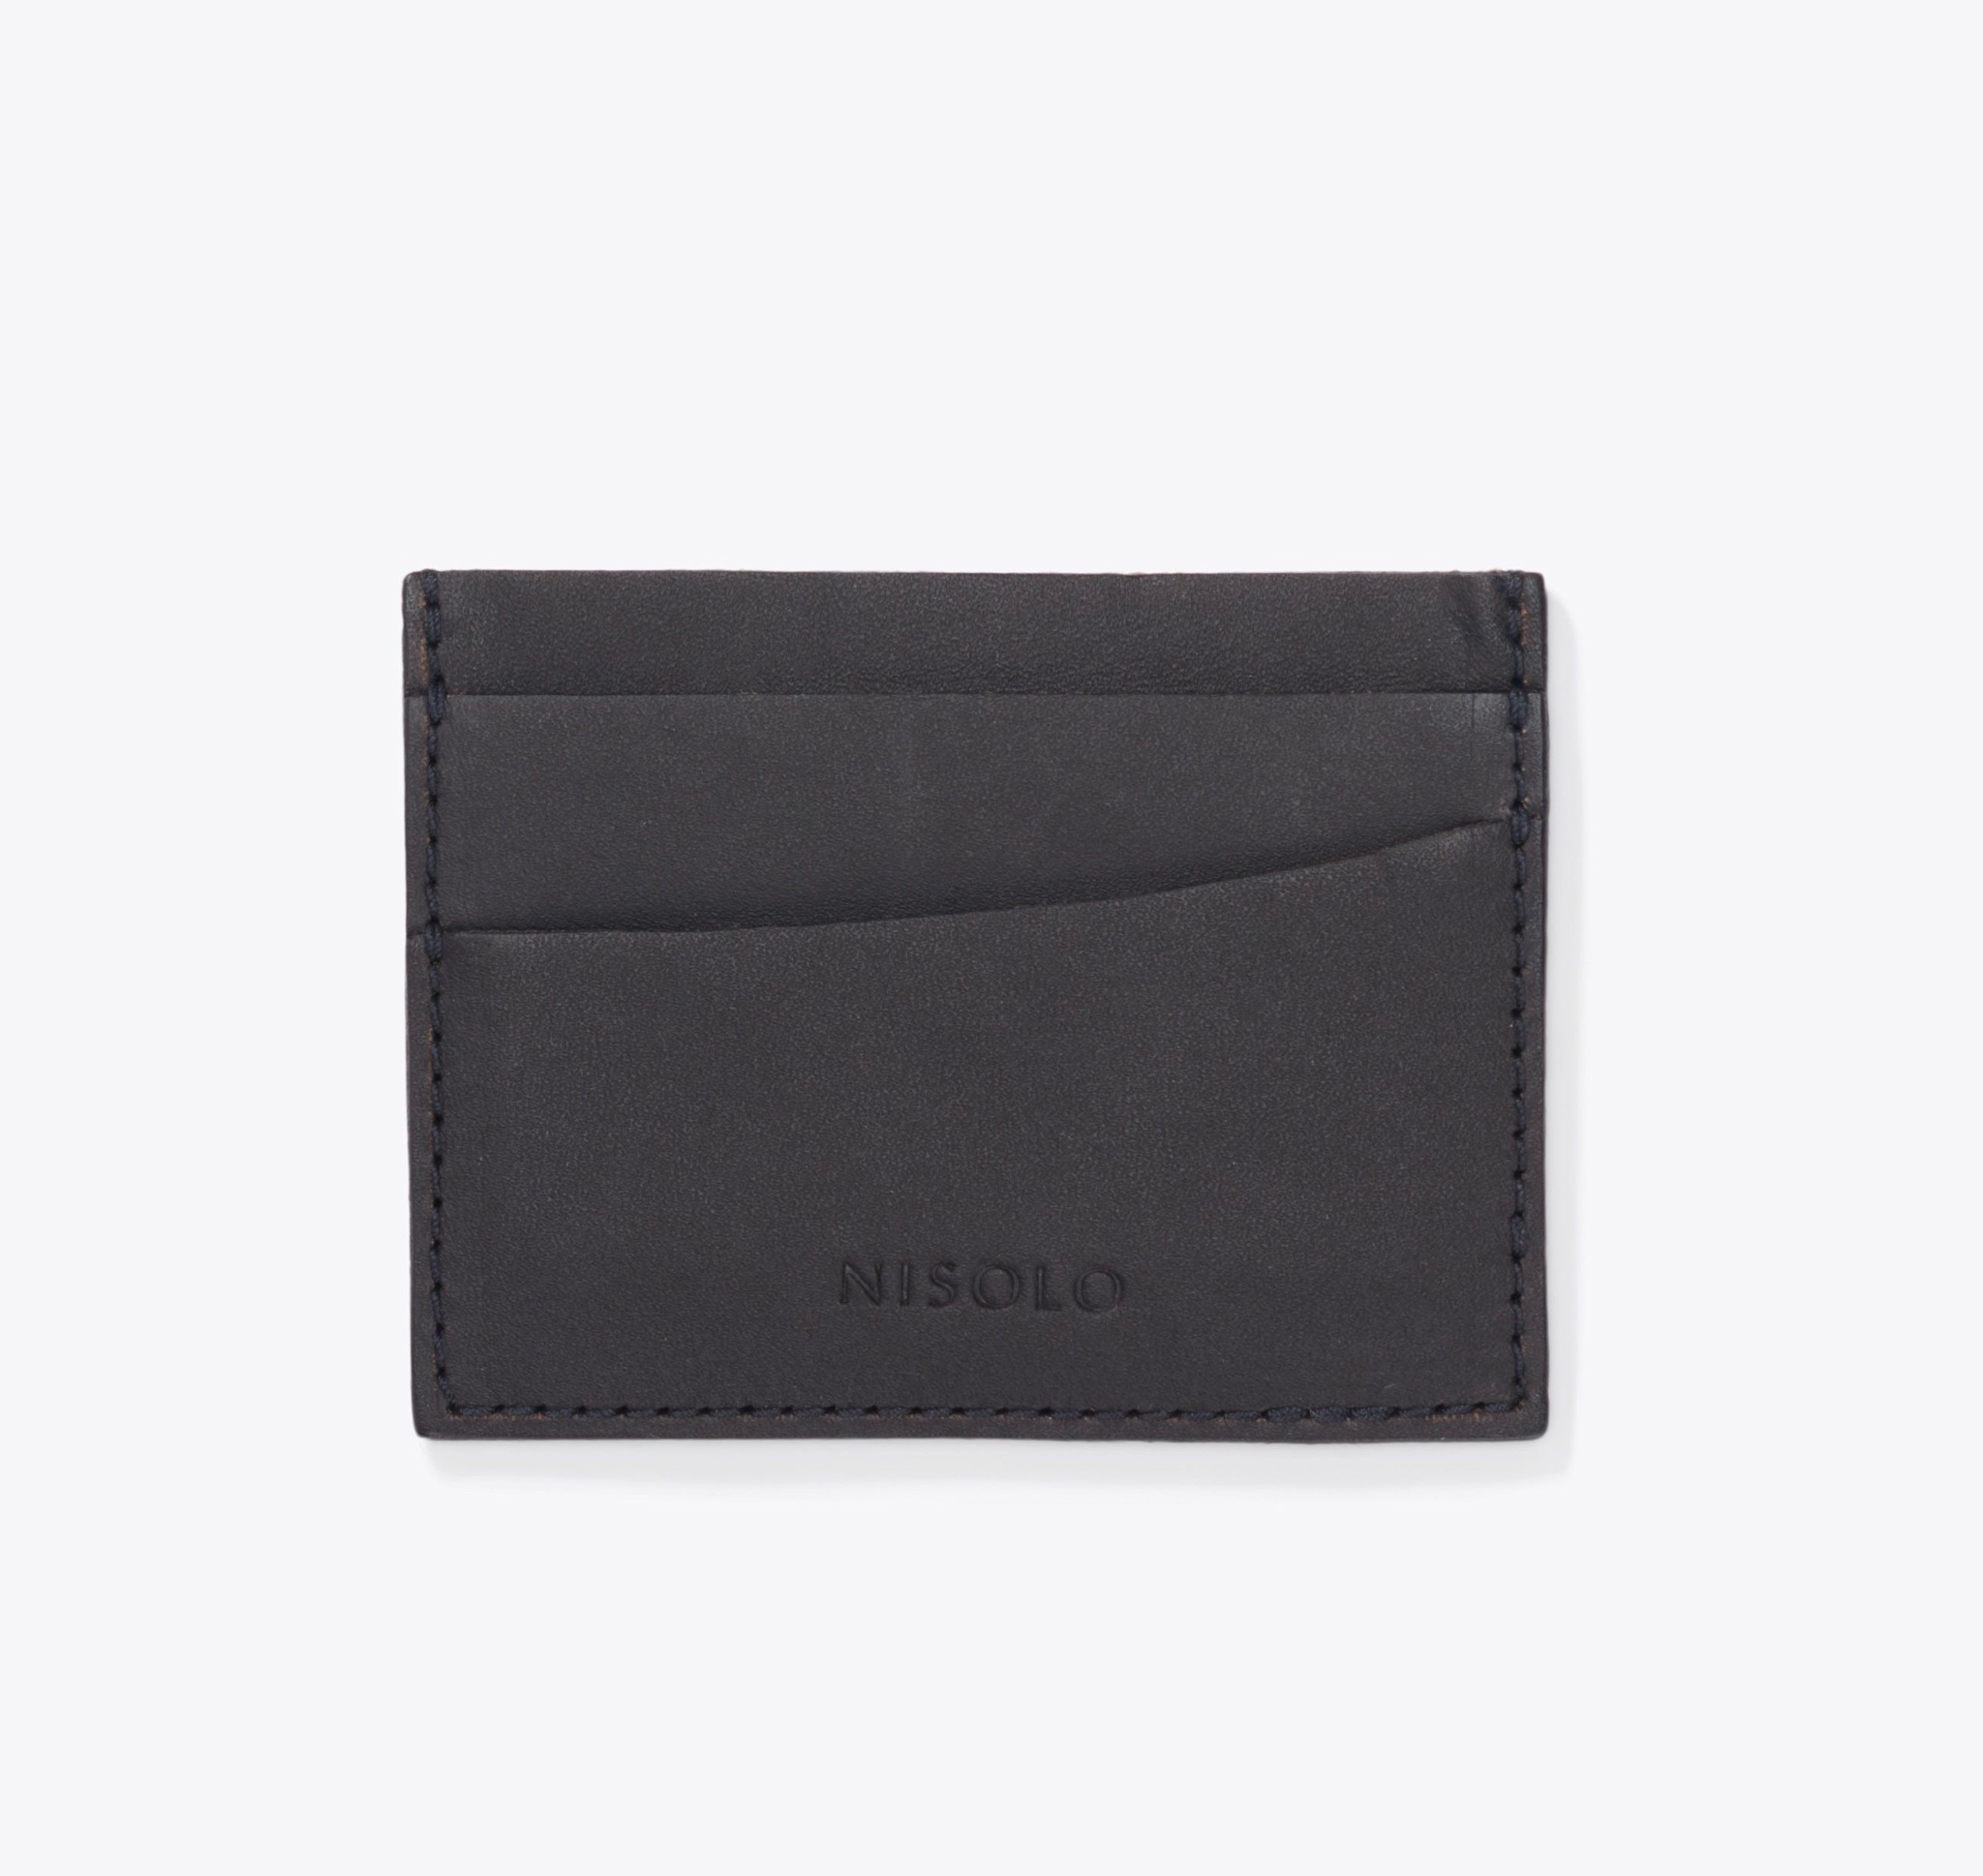 Nisolo Upcycled Leather Card Case Black - Every Nisolo product is built on the foundation of comfort, function, and design. 